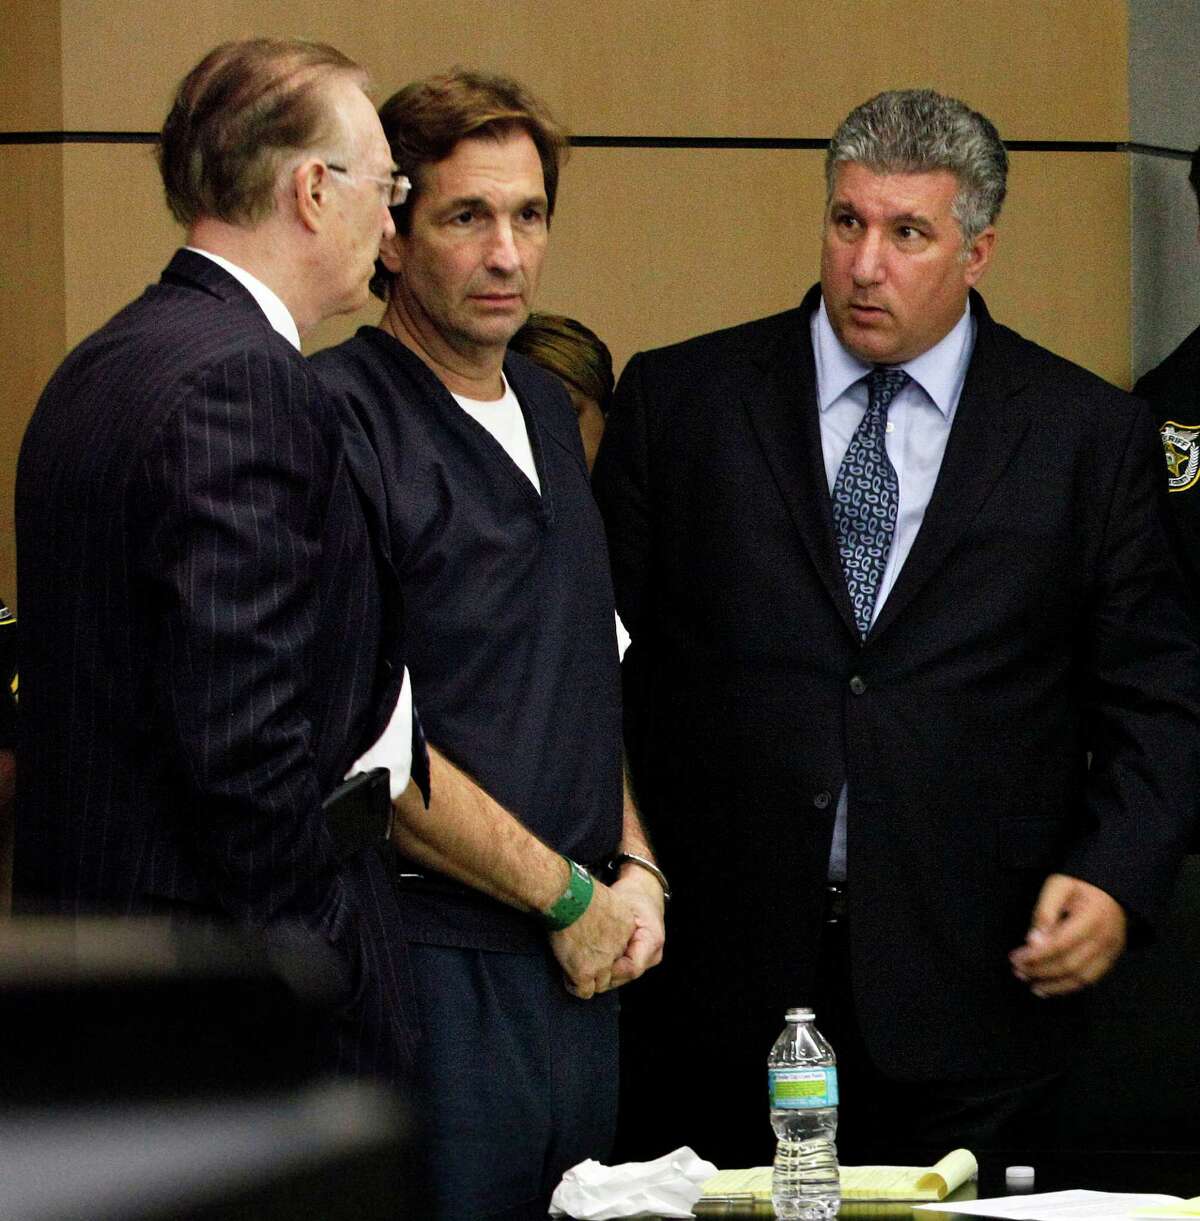 John Goodman, center, talks with his attorneys Roy Black and Guy Fronstin during his sentencing hearing on May 11 in West Palm Beach, Fla. (AP Photo/The Palm Beach Post, Lannis Waters, Pool)